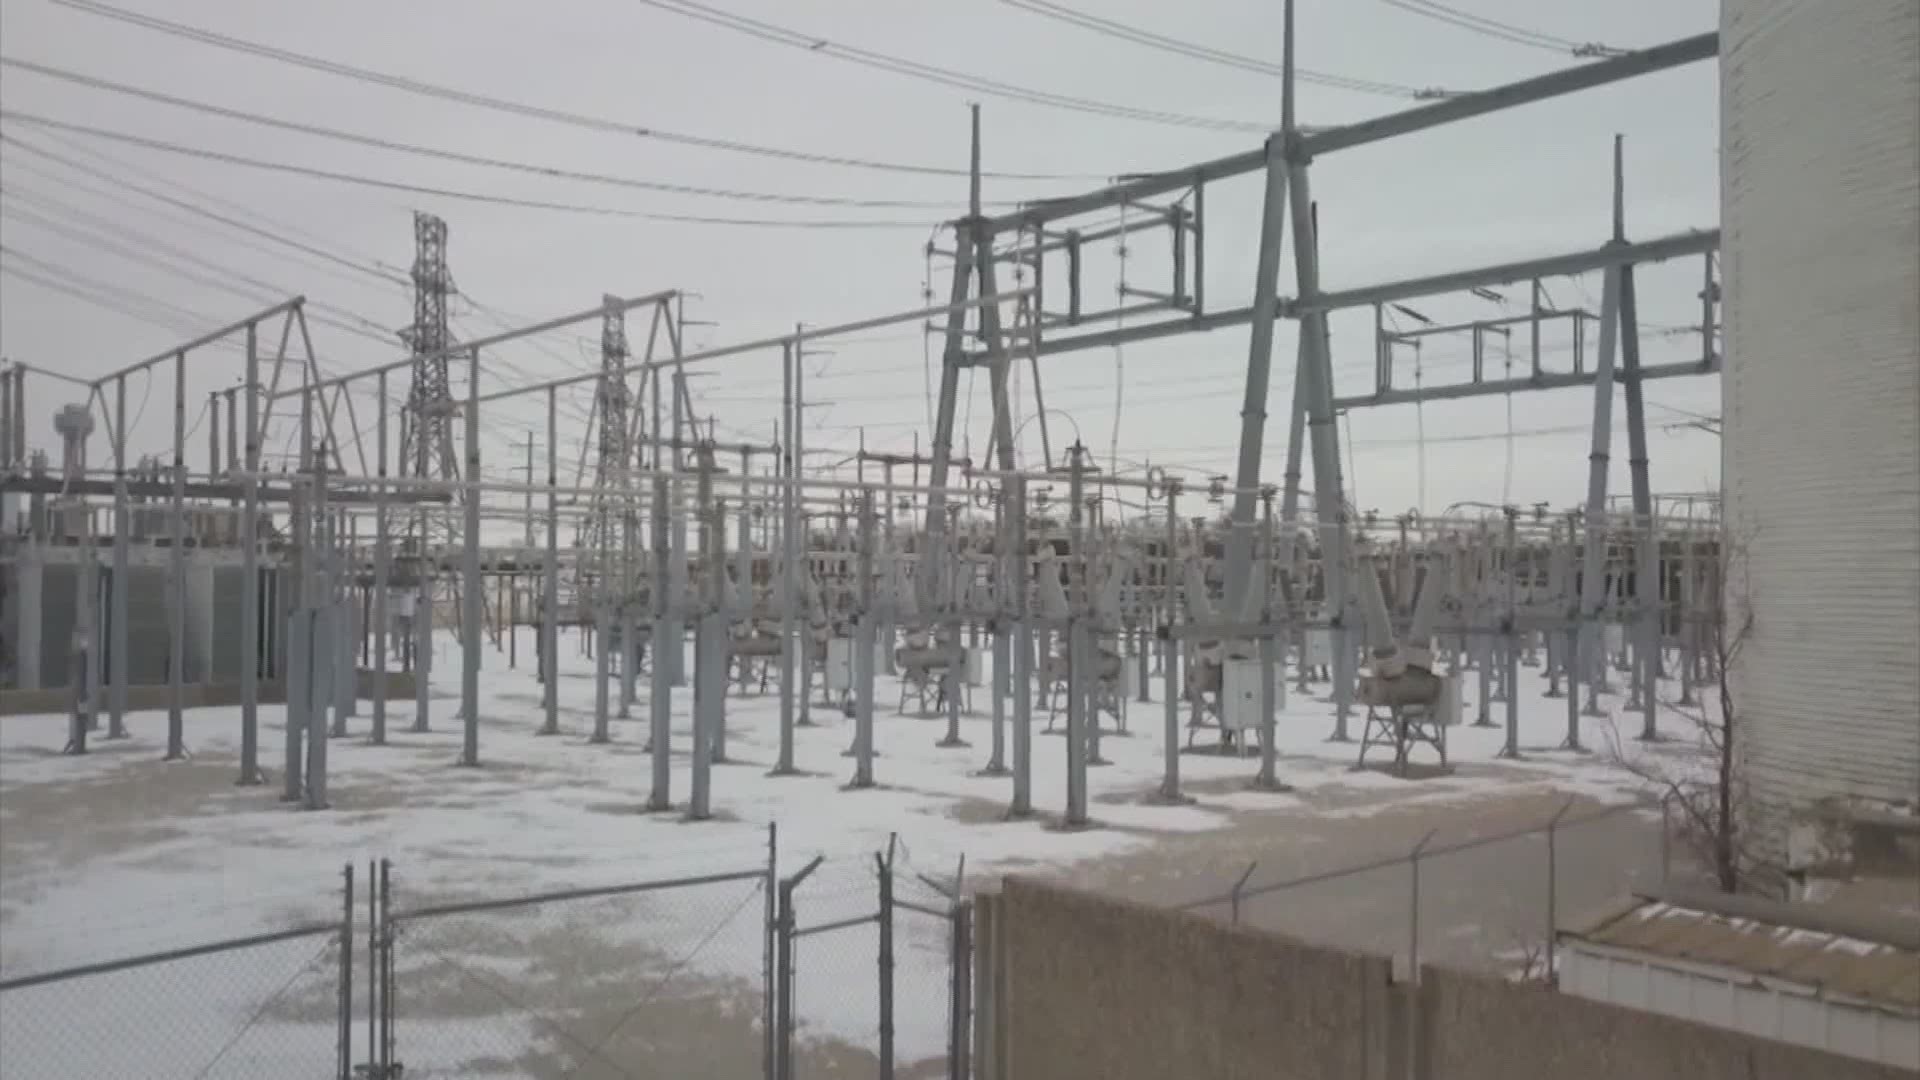 KHOU 11 Energy Expert Ed Hirs says leaving Texas power grid is not the answer to prevent another crisis.